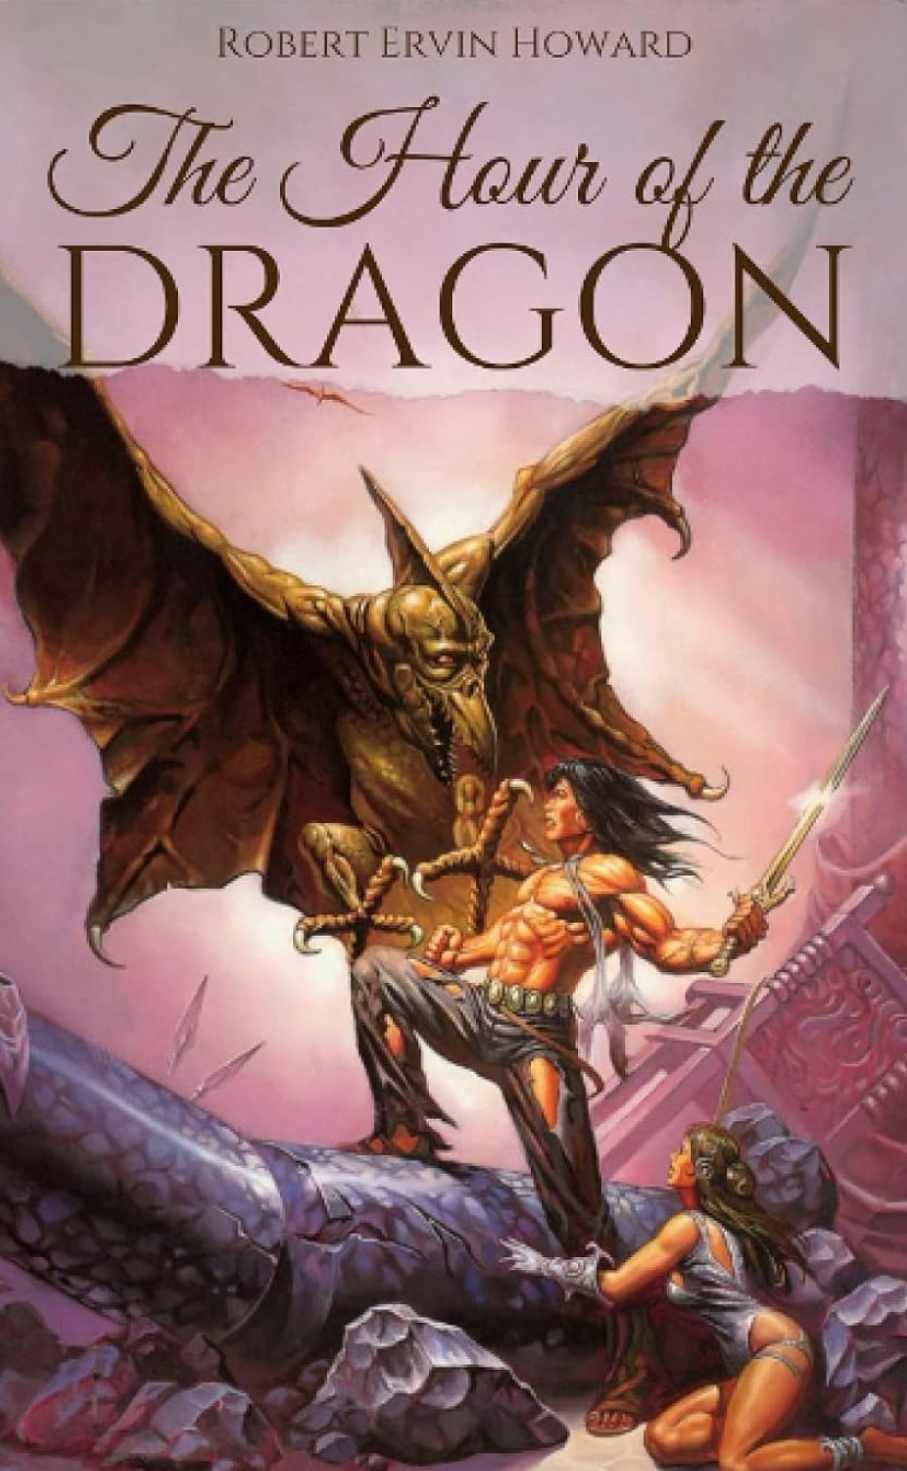 The Hour of the Dragon by Robert Ervin Howard